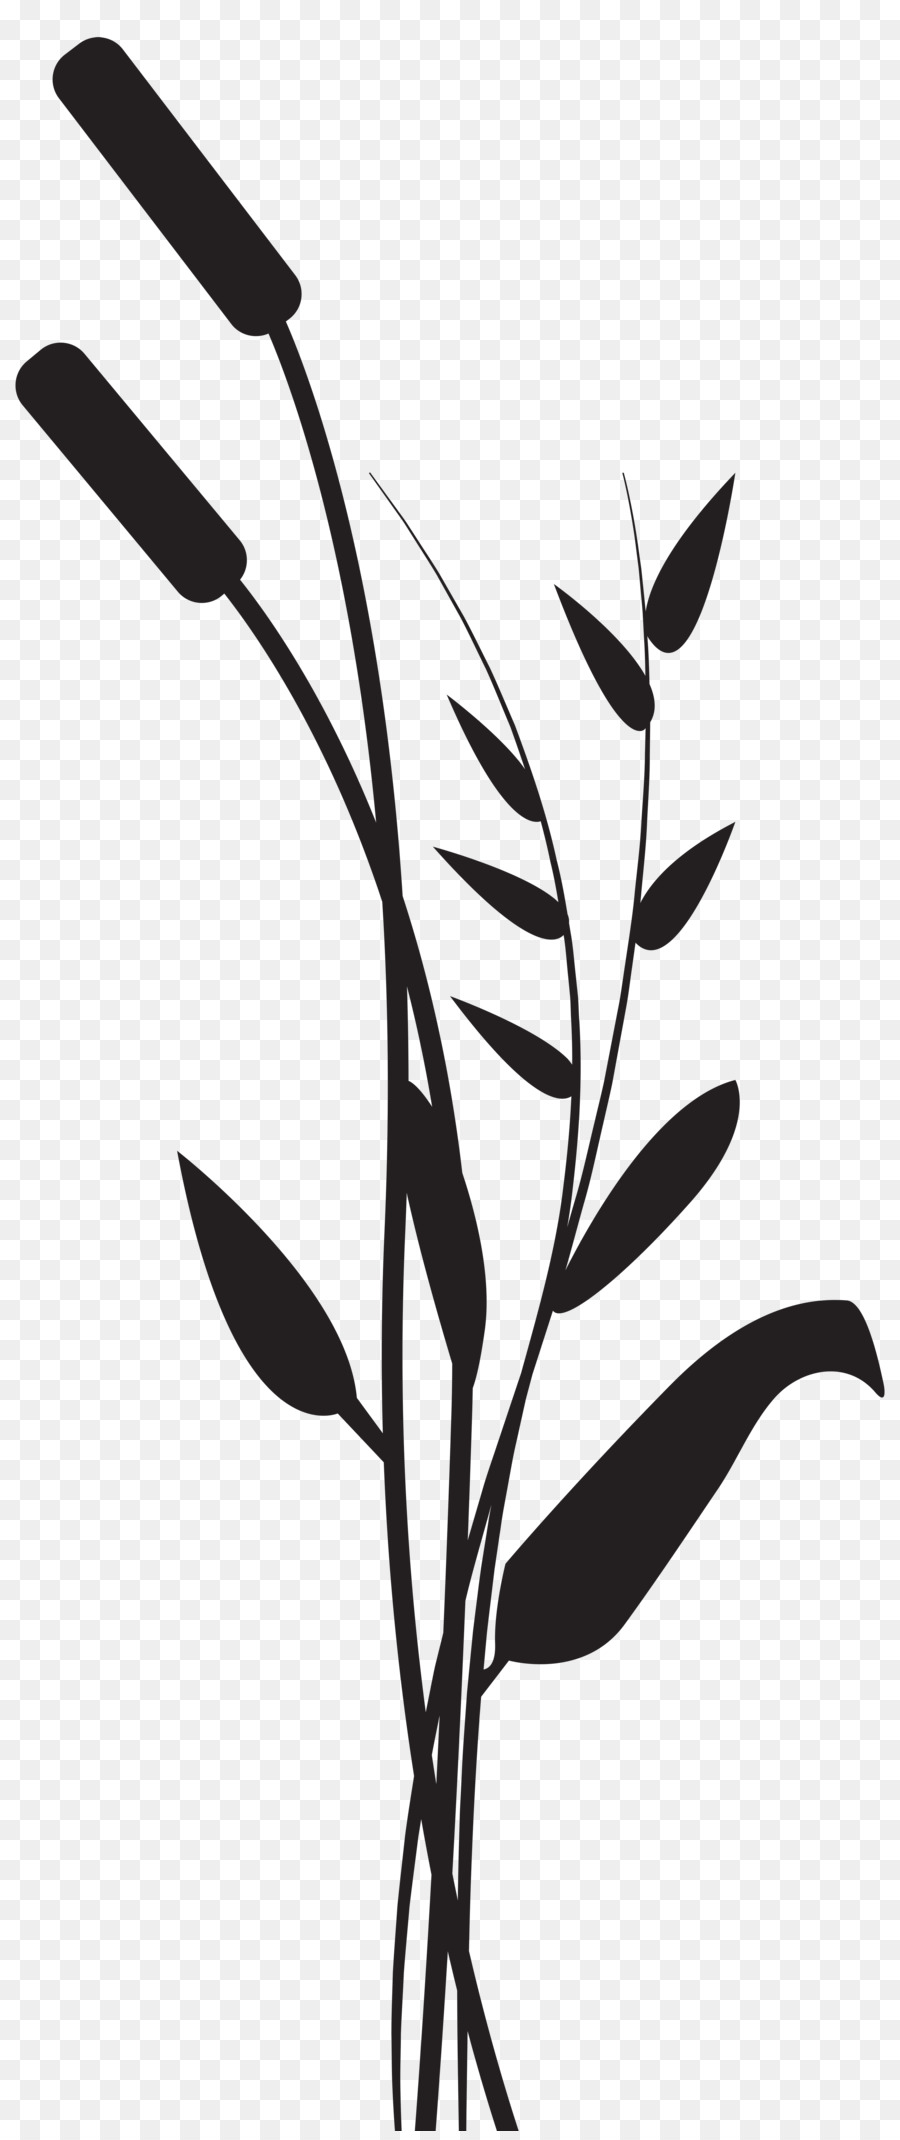 Silhouette Drawing Photography Clip art - silhouette grass png download - 3378*8000 - Free Transparent Silhouette png Download.